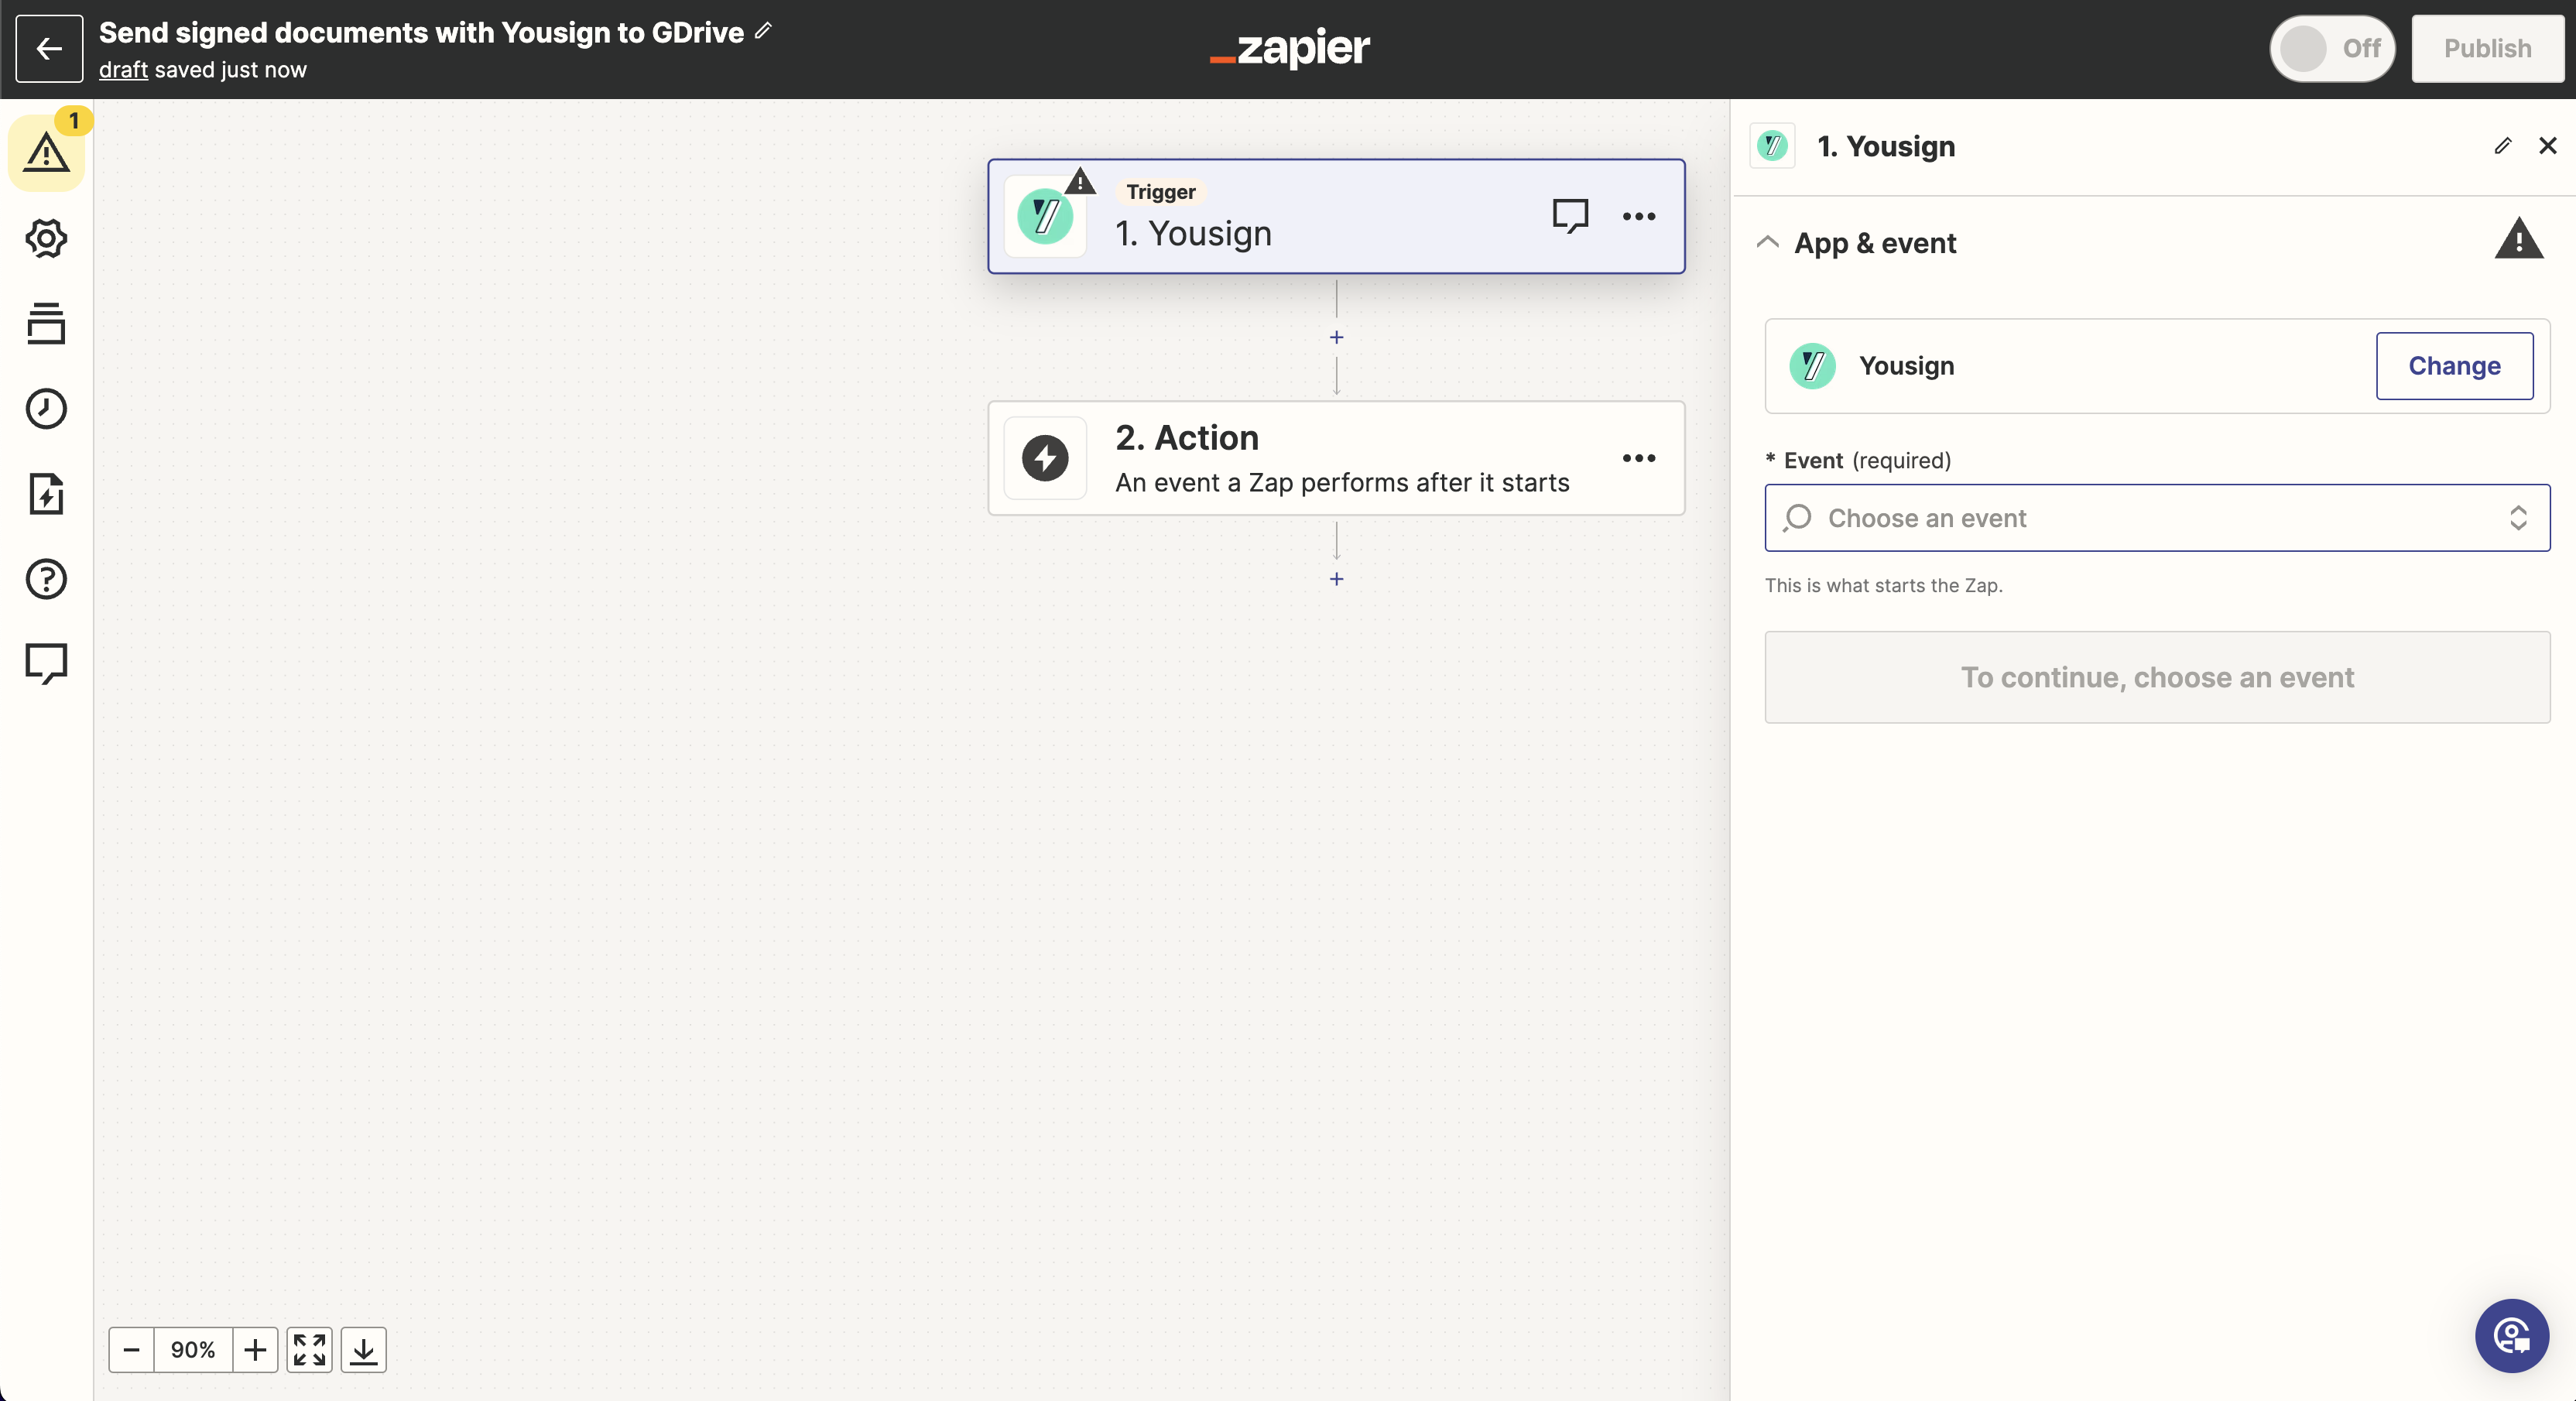 Event of trigger for Yousign on a Zap